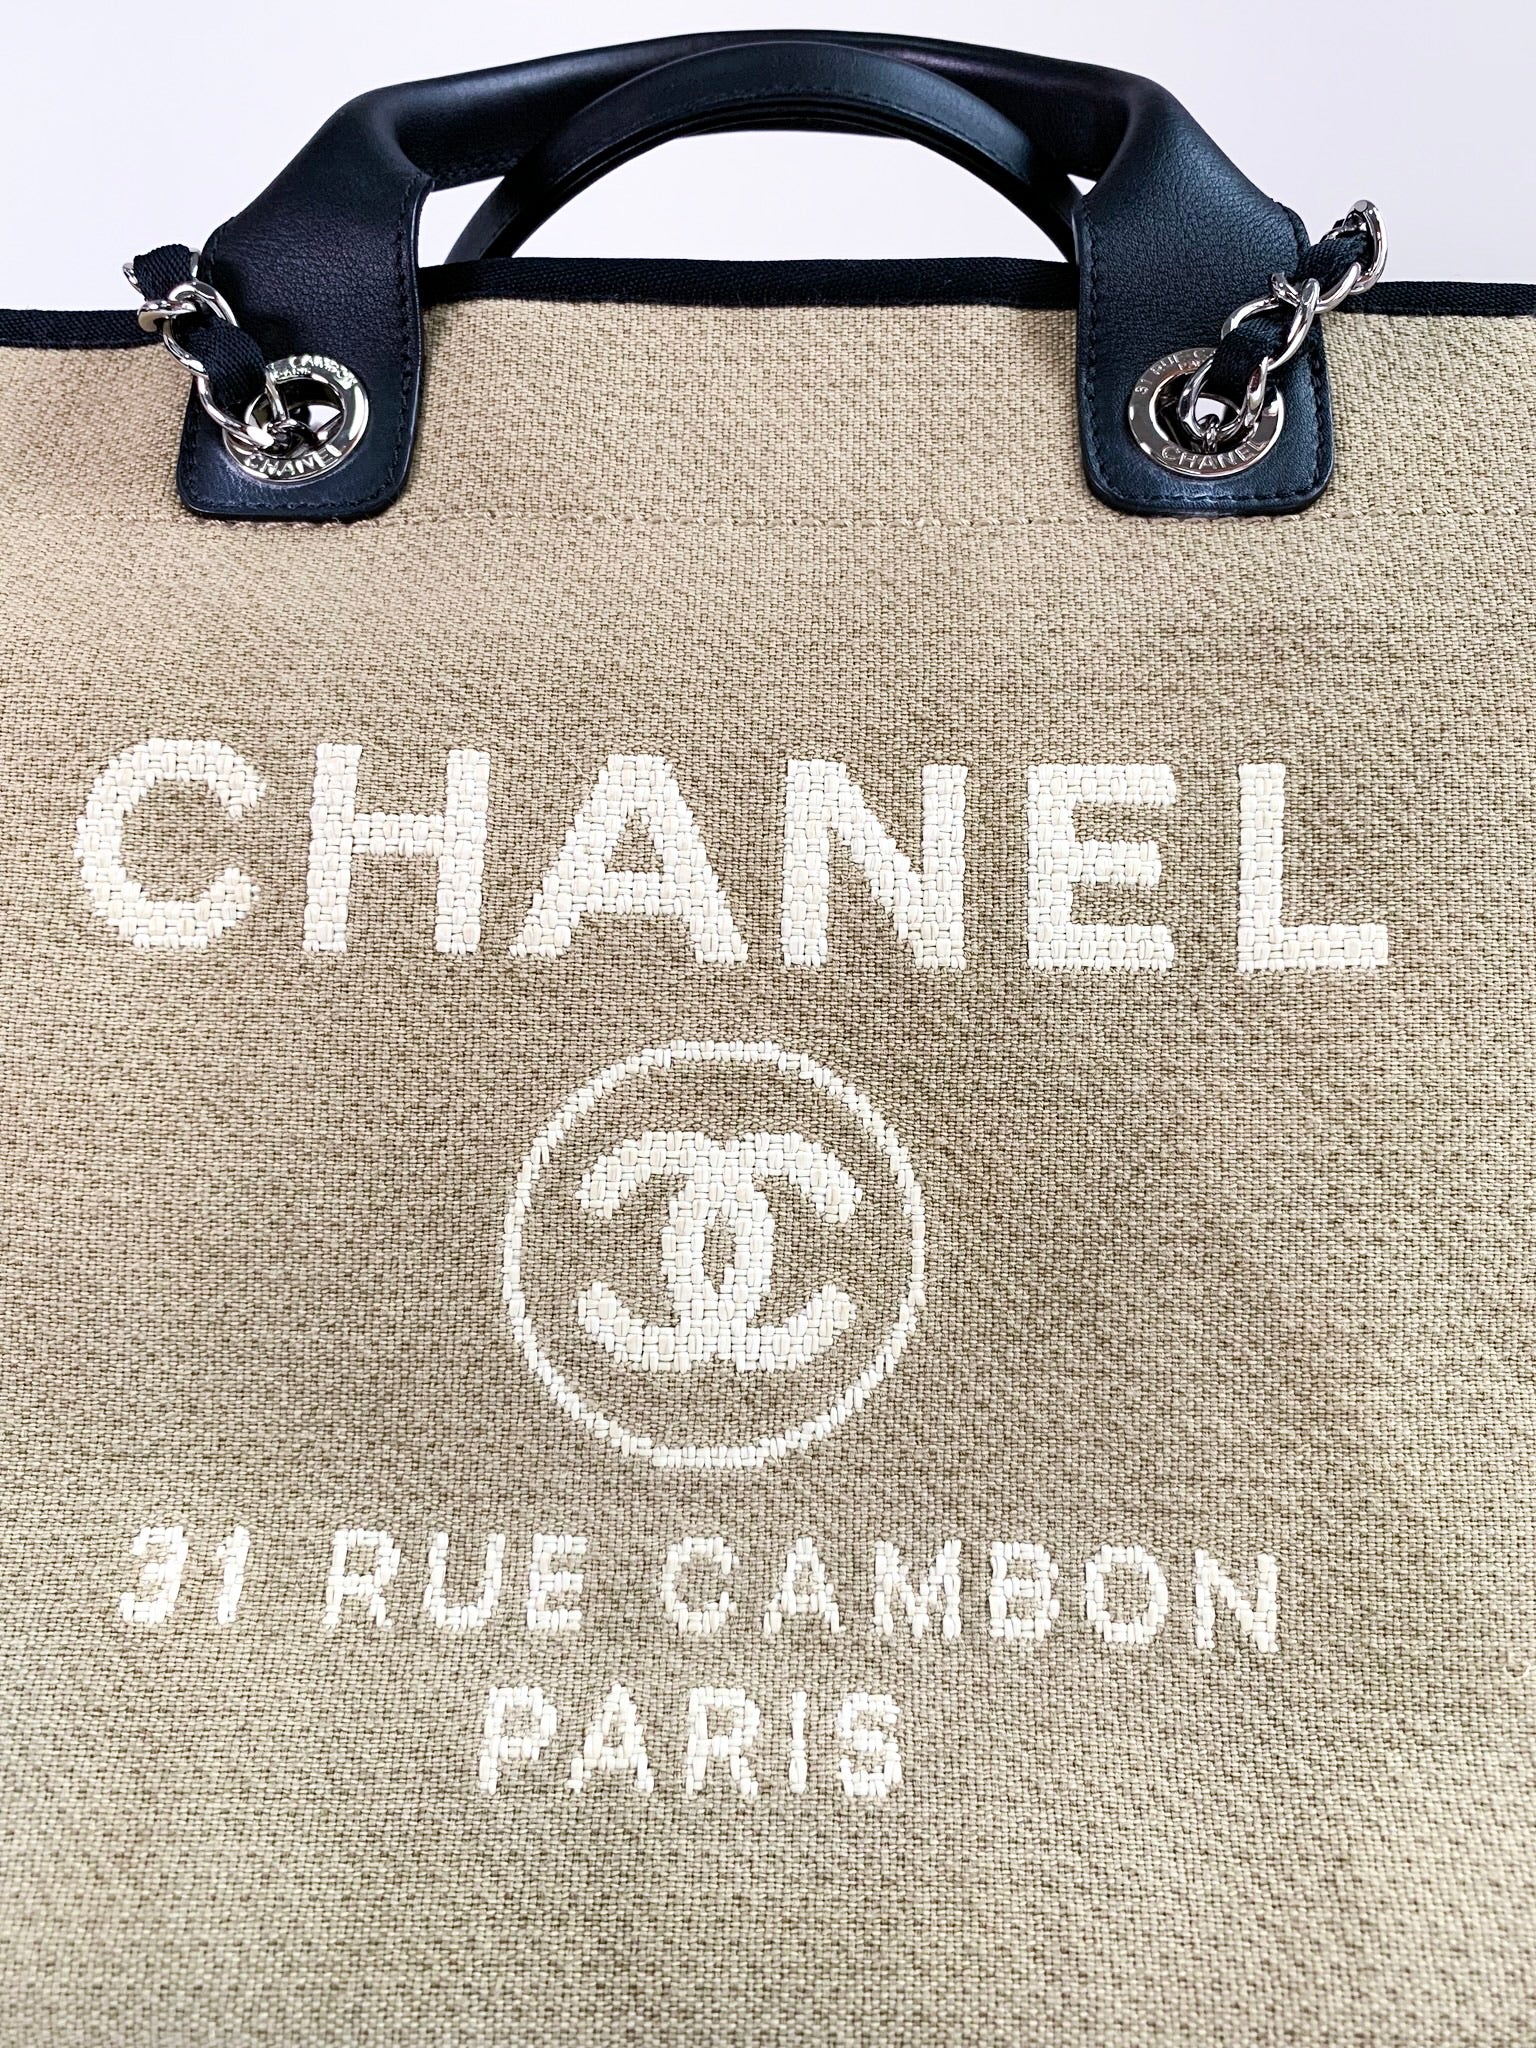 Chanel Canvas Large Deauville Tote Beige Coco Approved Studio